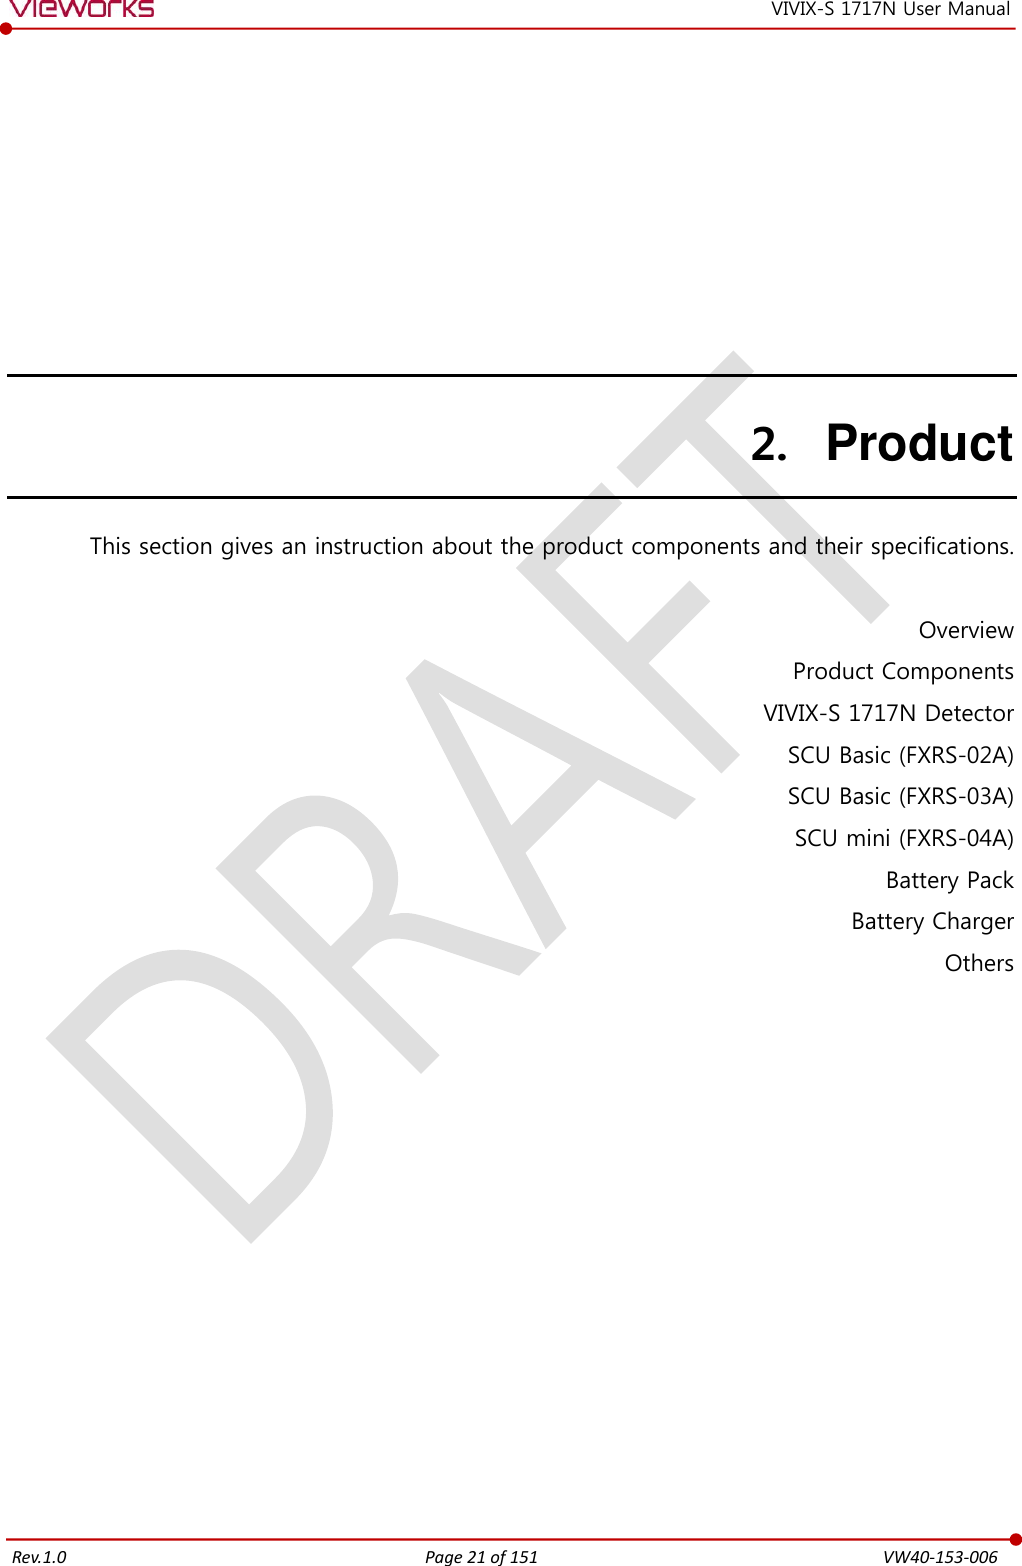   Rev.1.0 Page 21 of 151  VW40-153-006 VIVIX-S 1717N User Manual 2. Product This section gives an instruction about the product components and their specifications.  Overview Product Components VIVIX-S 1717N Detector SCU Basic (FXRS-02A) SCU Basic (FXRS-03A) SCU mini (FXRS-04A) Battery Pack Battery Charger Others     